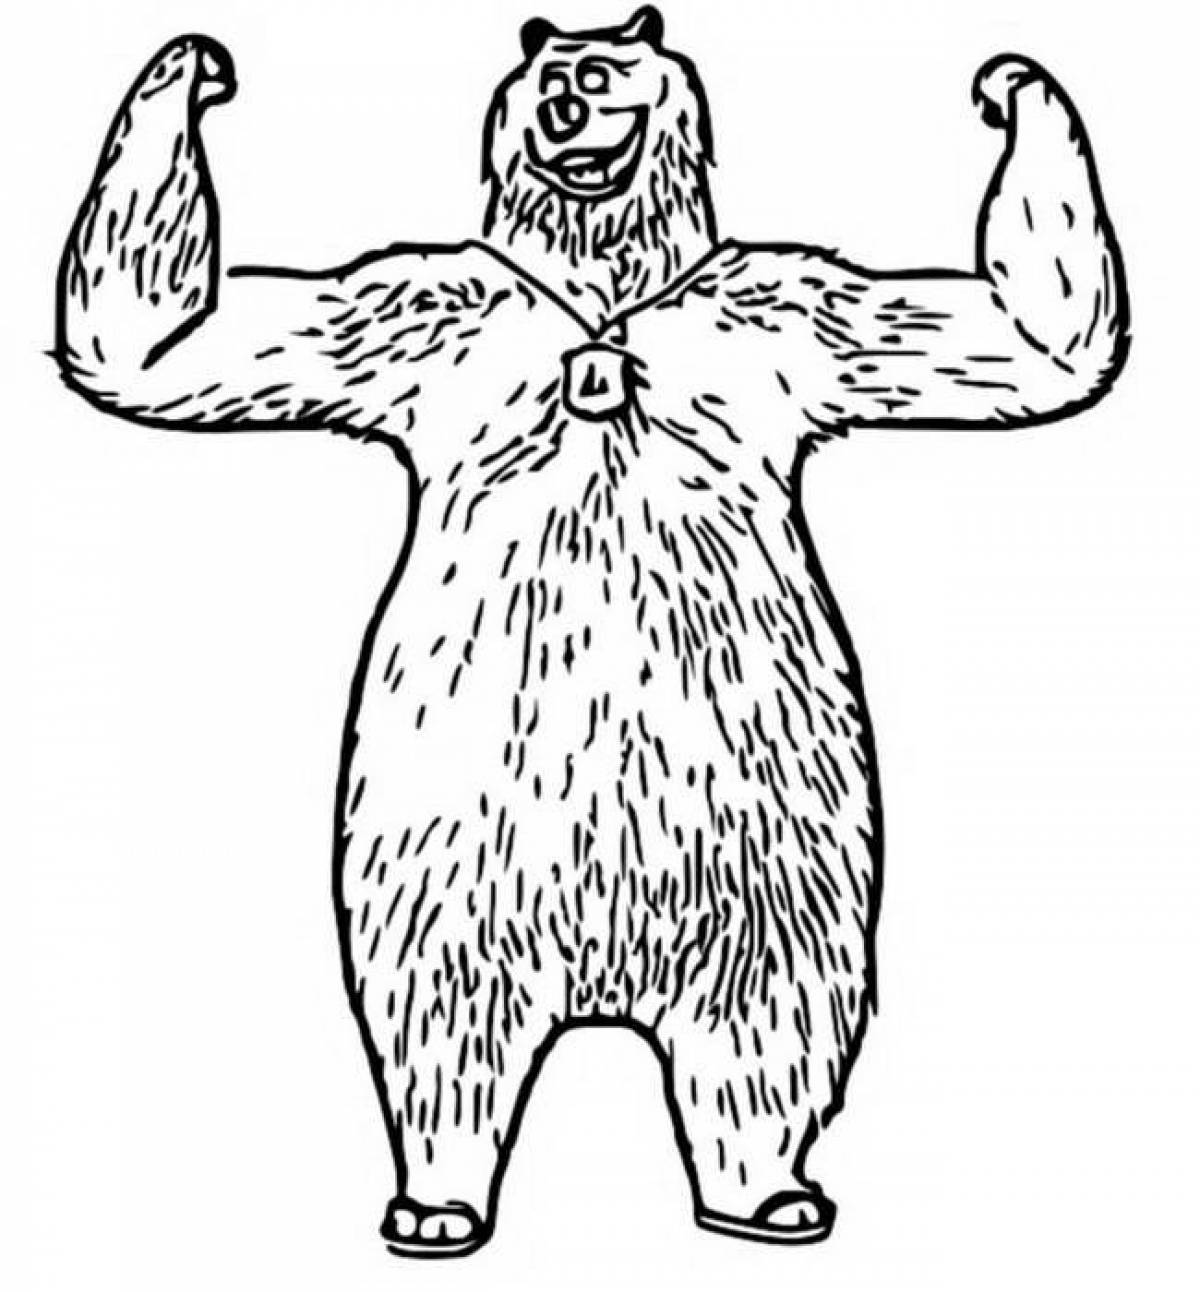 Delightful grizzly and lemming coloring pages